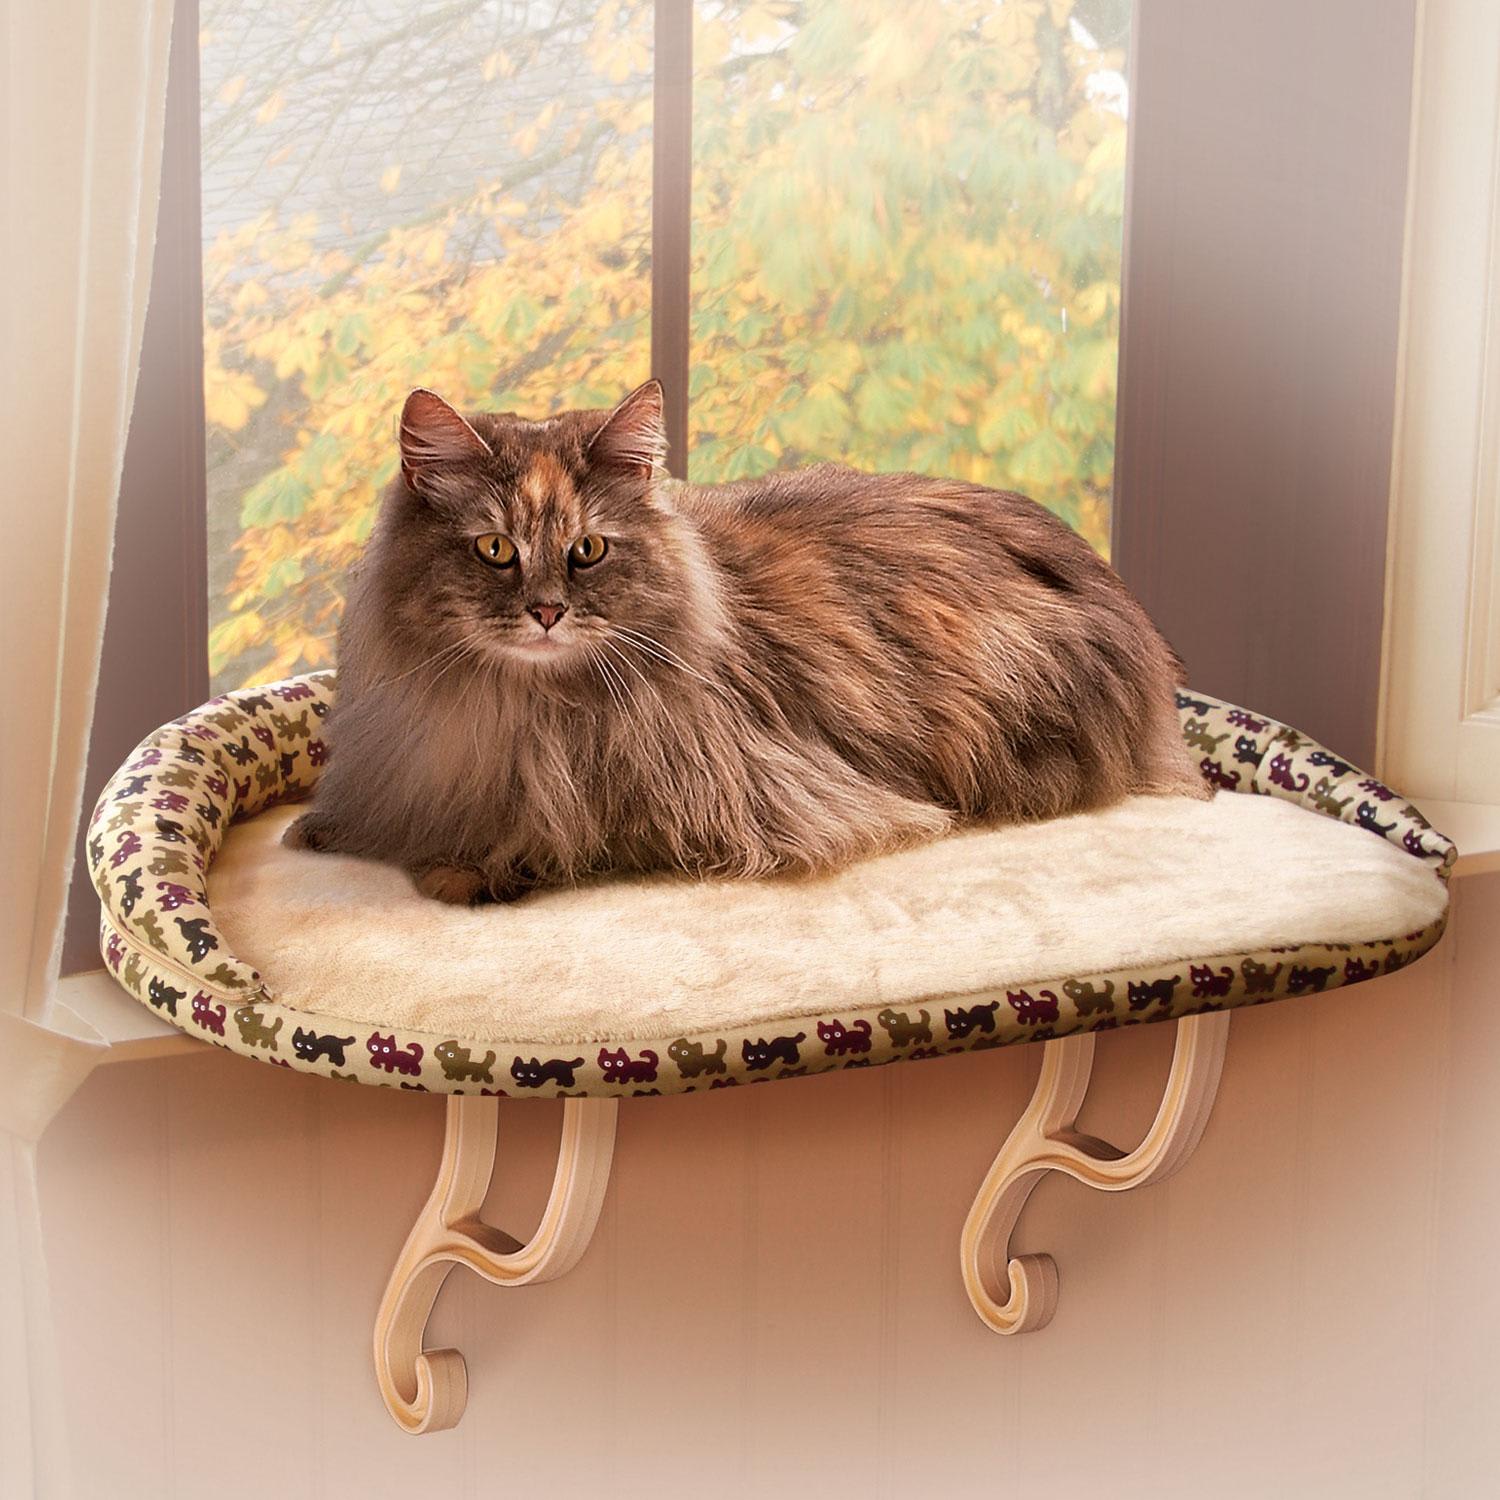 Photos - Cat Bed / House K&H Kitty Sill Bolster Deluxe Cat Window Perch, Small, Tan 100213044 